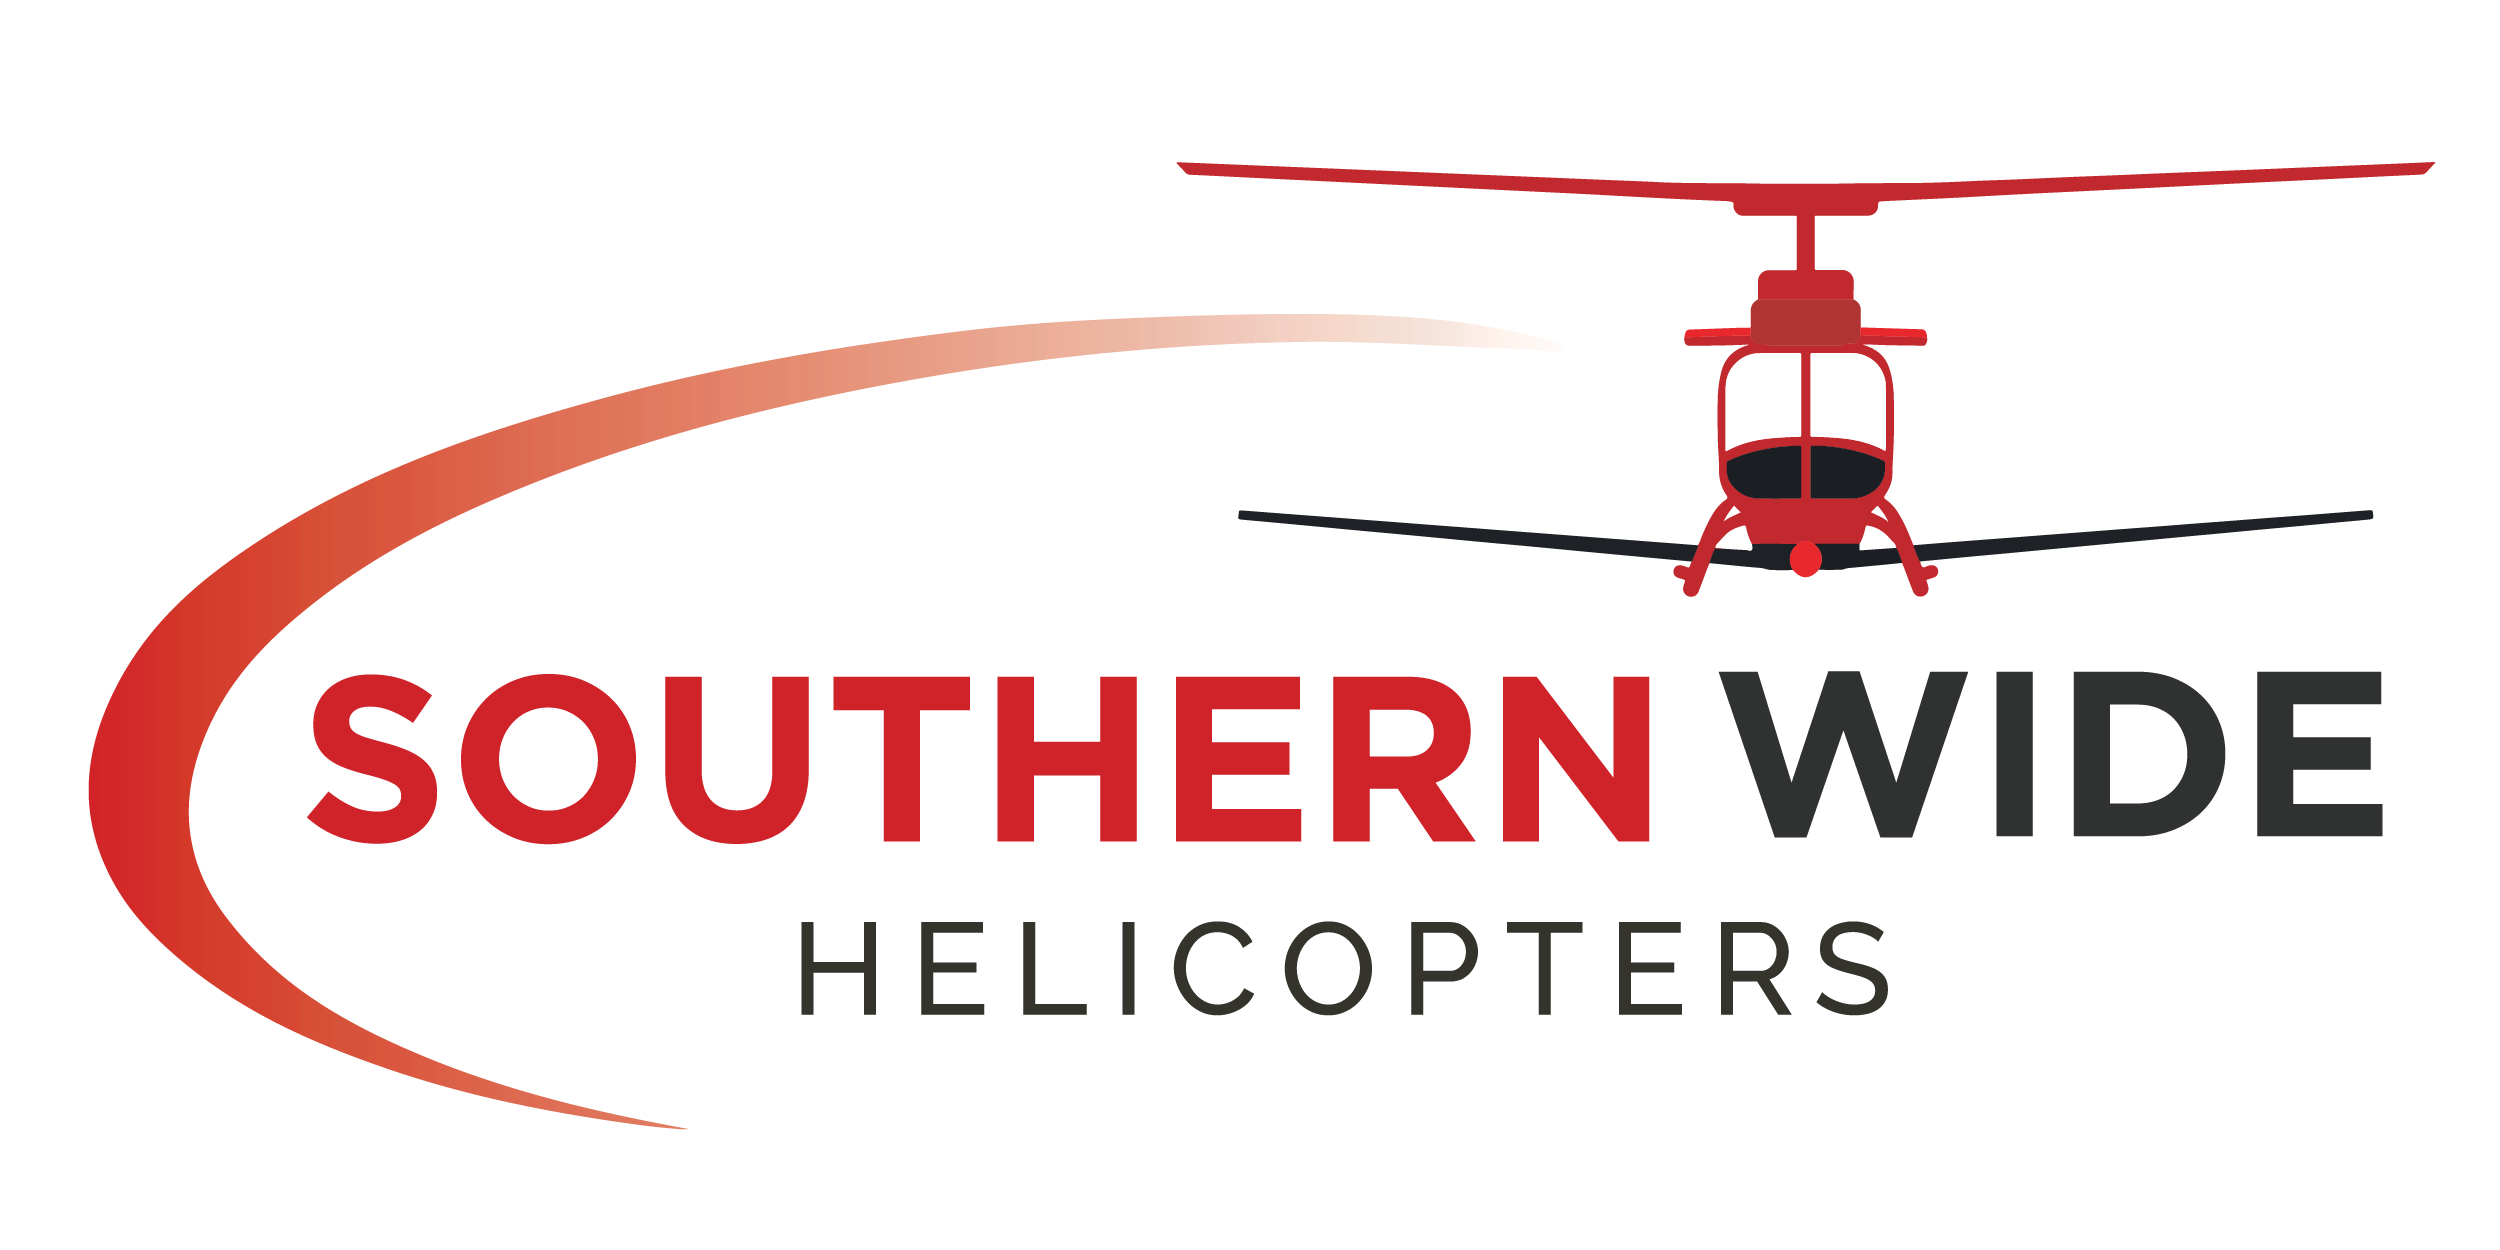 Southern Wide Helicopters logo